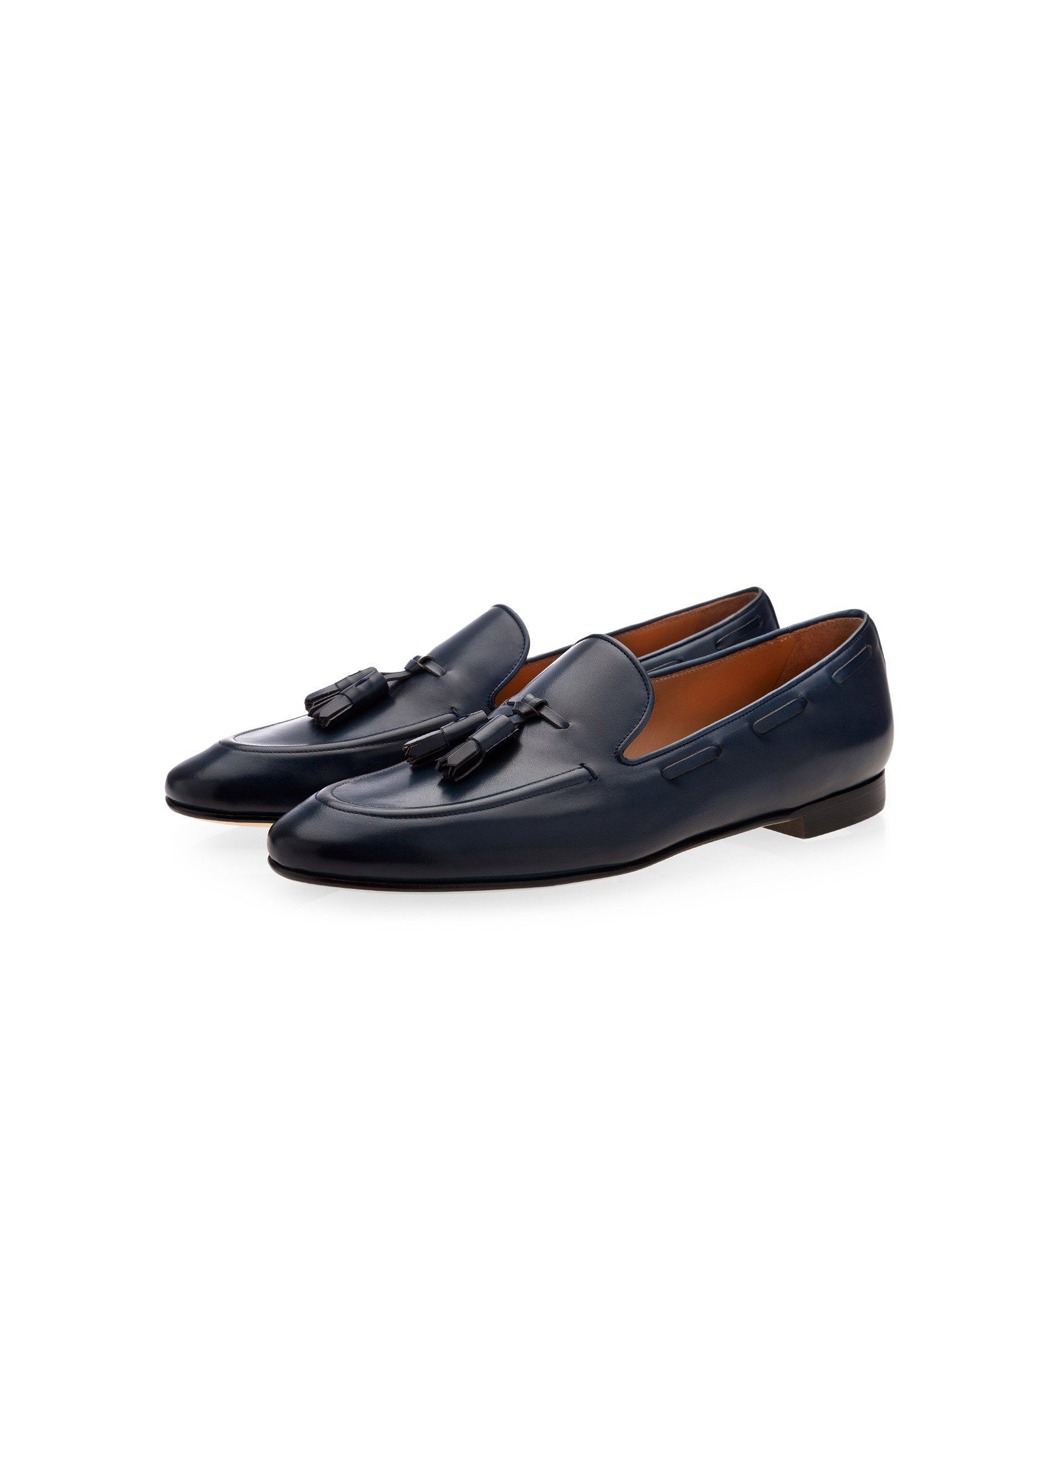 PHILIPPE NAPPA NAVY LOAFERS